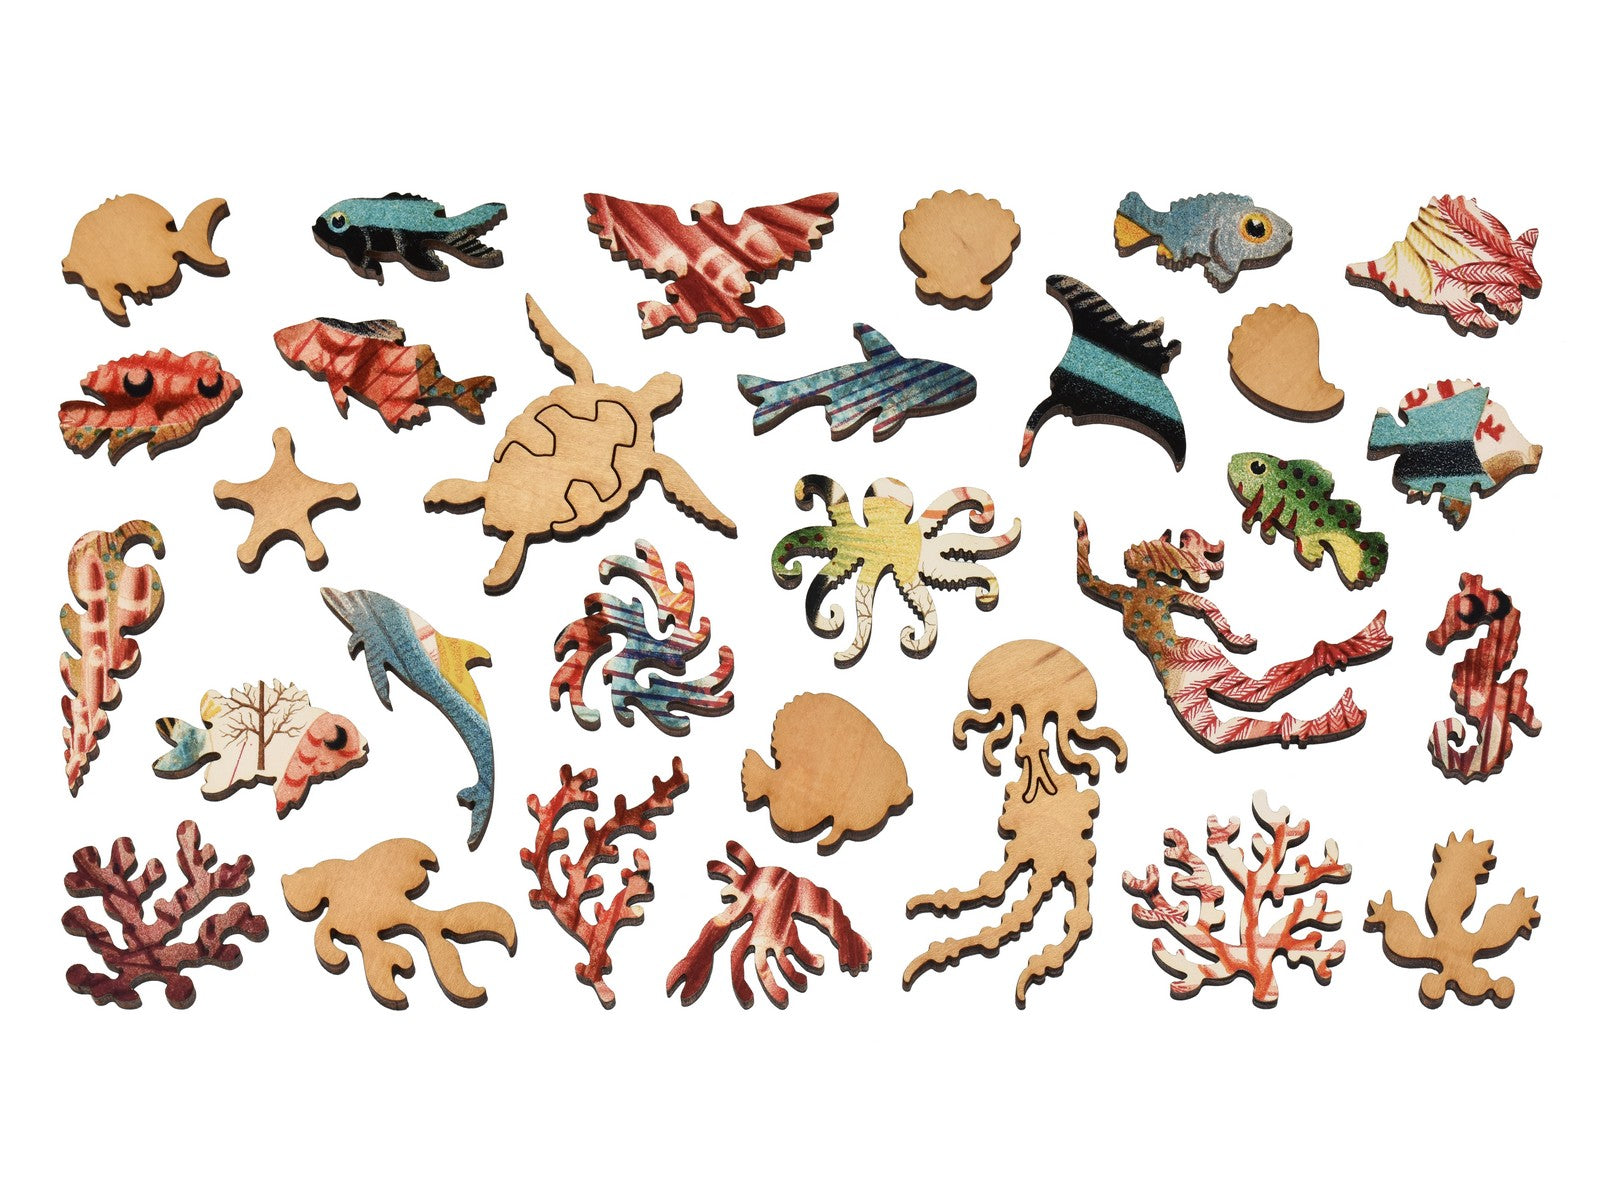 The whimsy pieces that can be found in the puzzle, Great Barrier Reef Echinoderms and Fish.